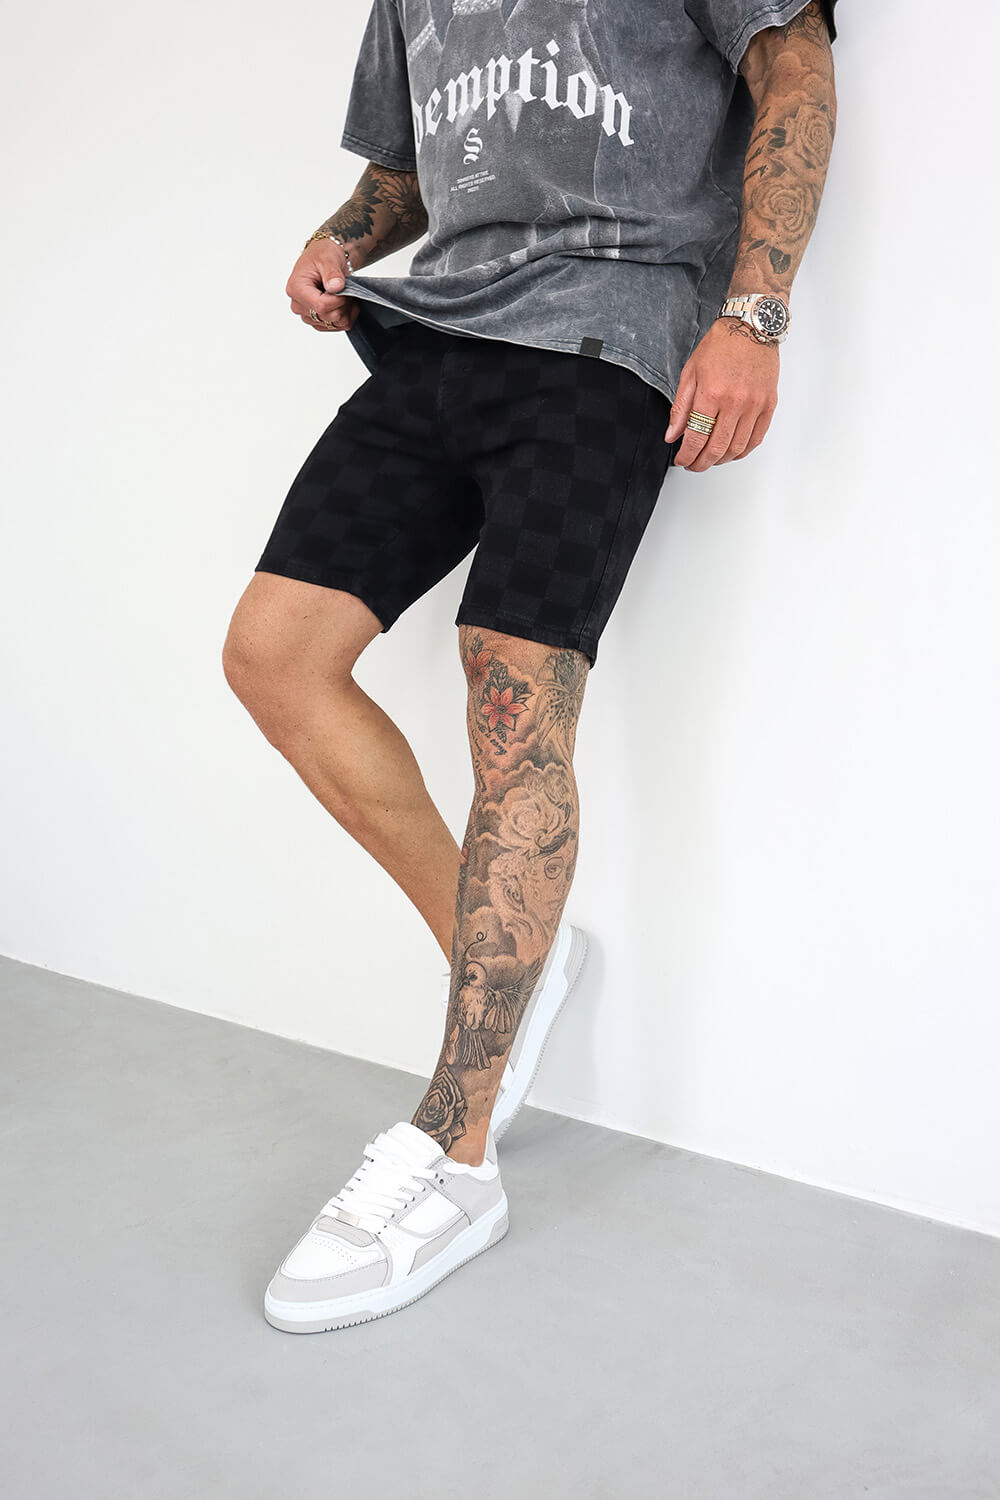 Mens Business Casual Checked Shorts Summer Sports Straight Slim Fit Short  Pants  eBay